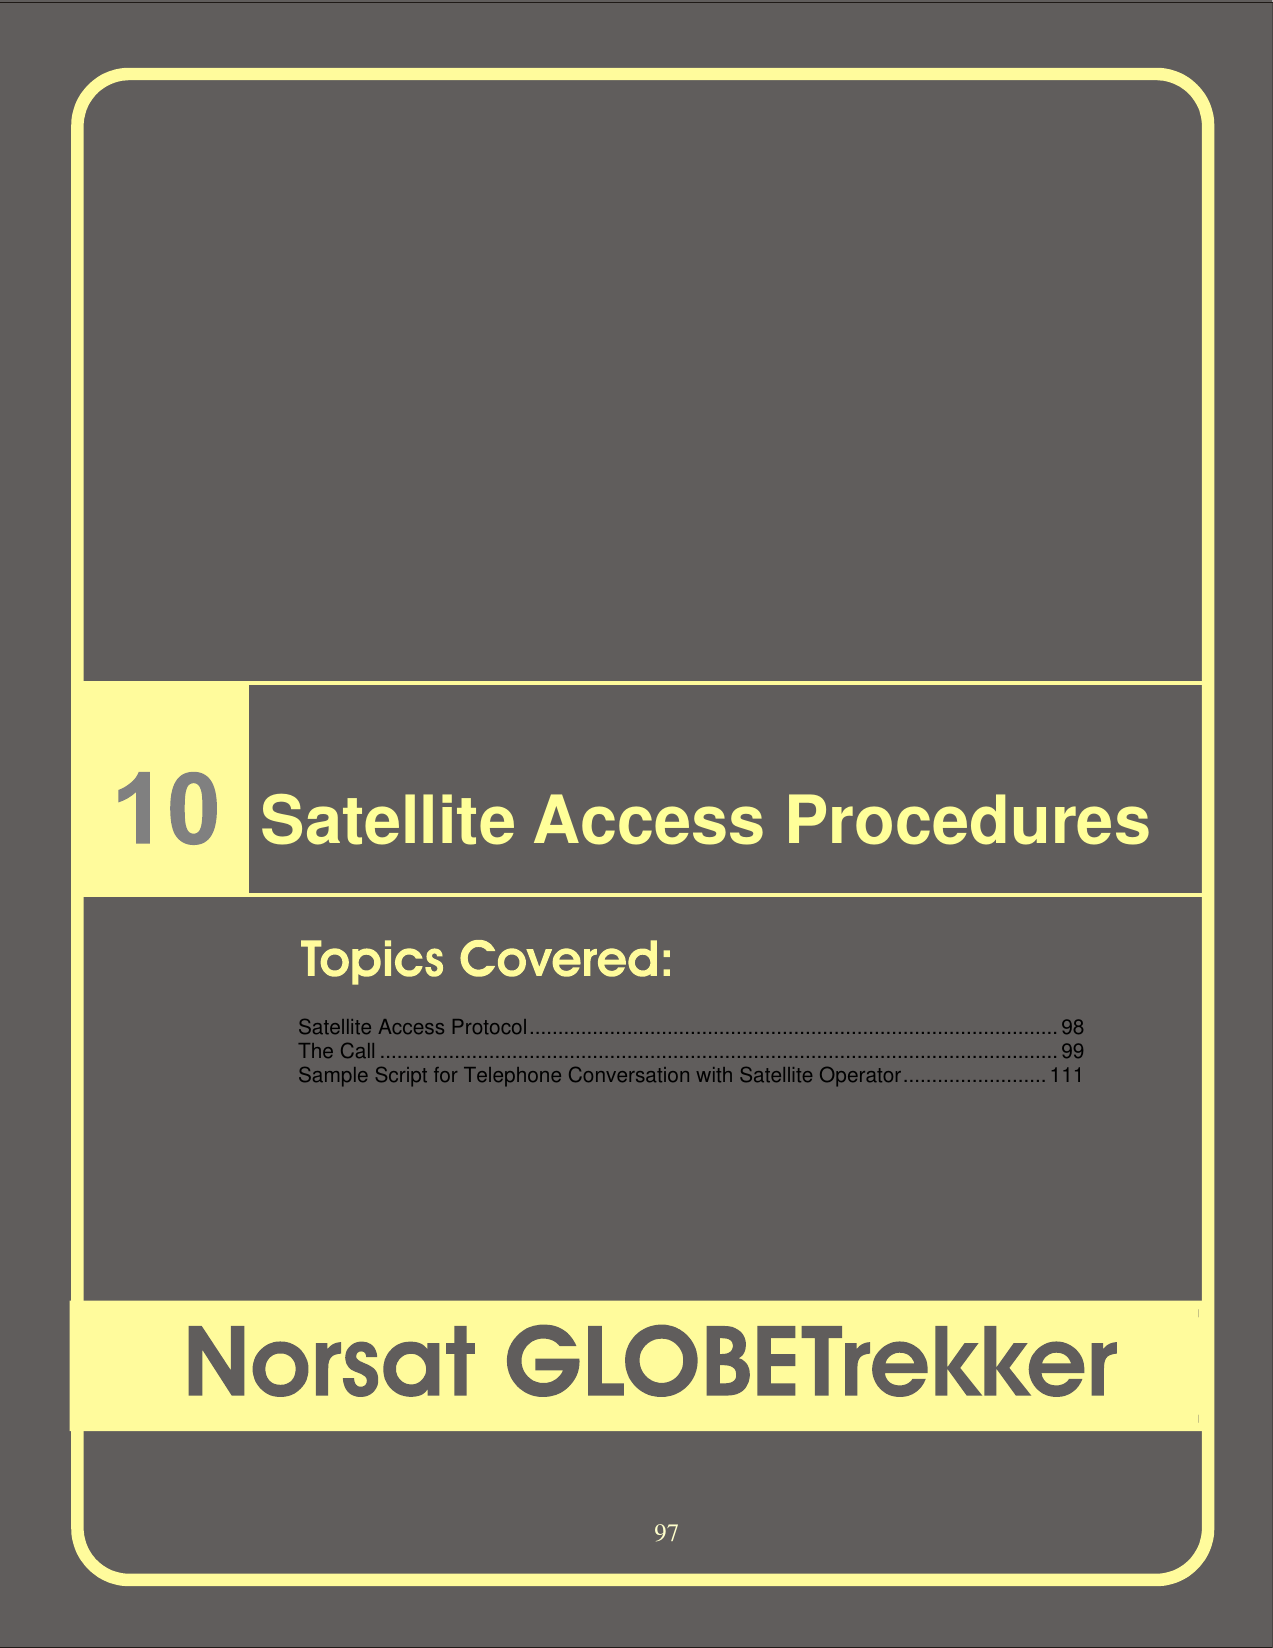   97                     Satellite Access Procedures     Satellite Access Protocol............................................................................................98 The Call......................................................................................................................99 Sample Script for Telephone Conversation with Satellite Operator.........................111 